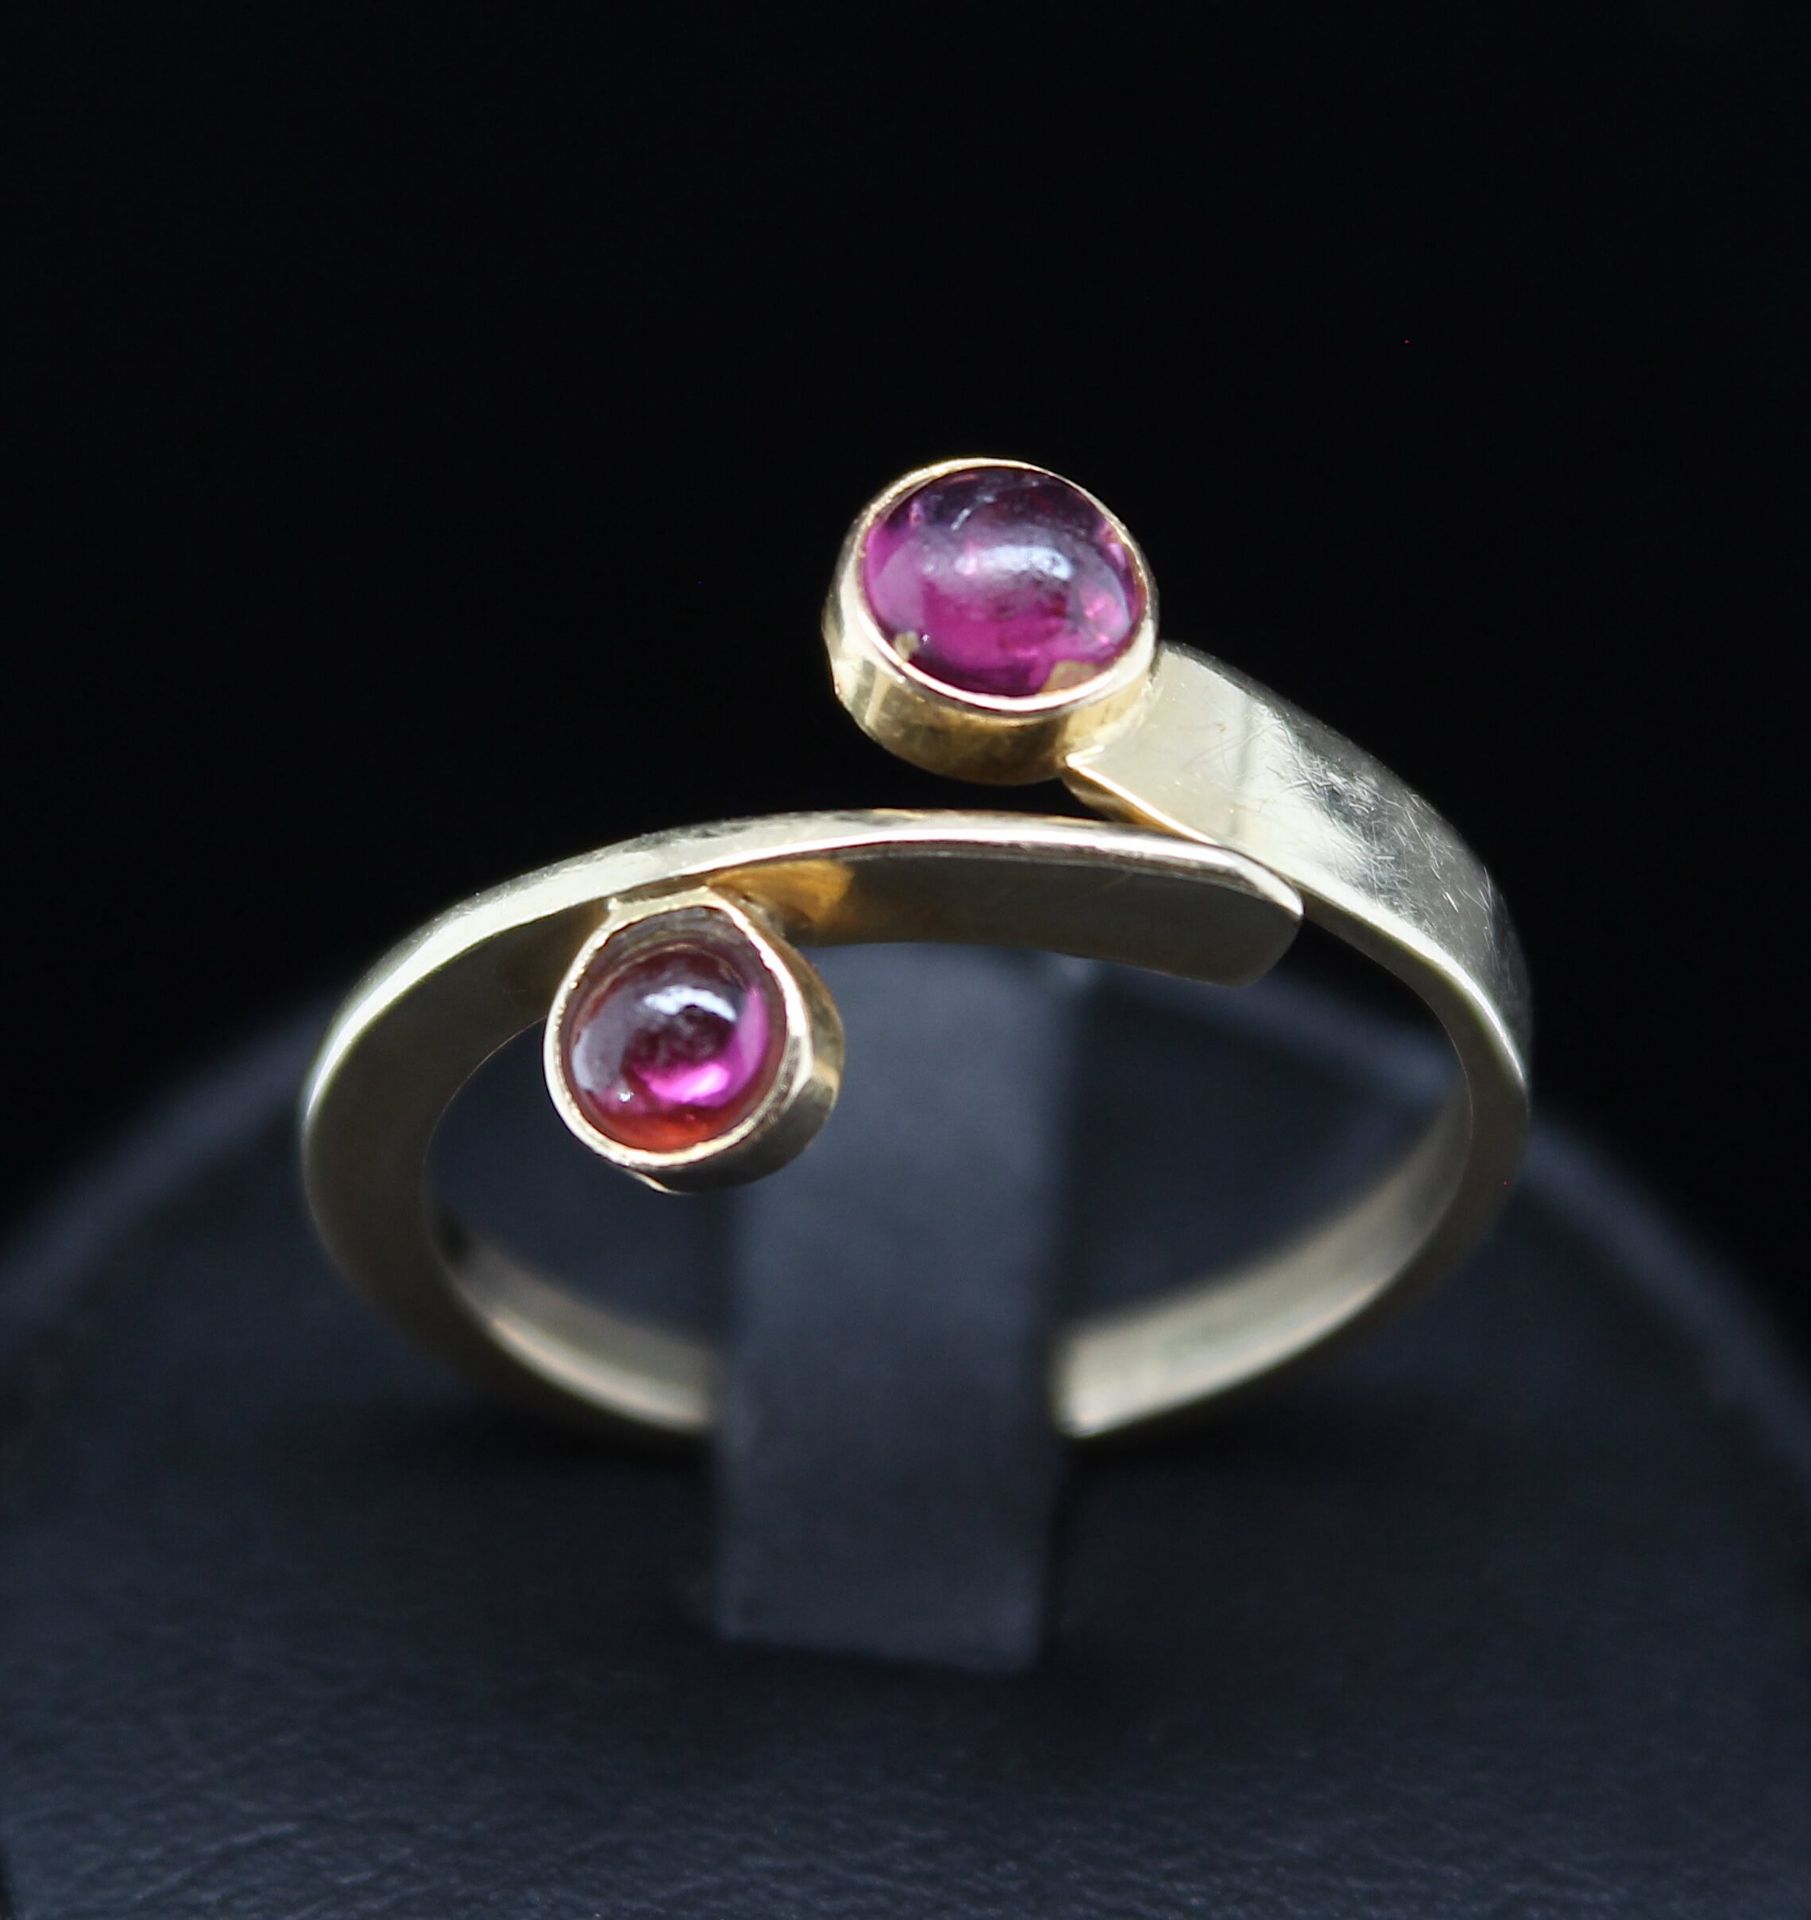 Ring with 2 garnets - Image 3 of 3